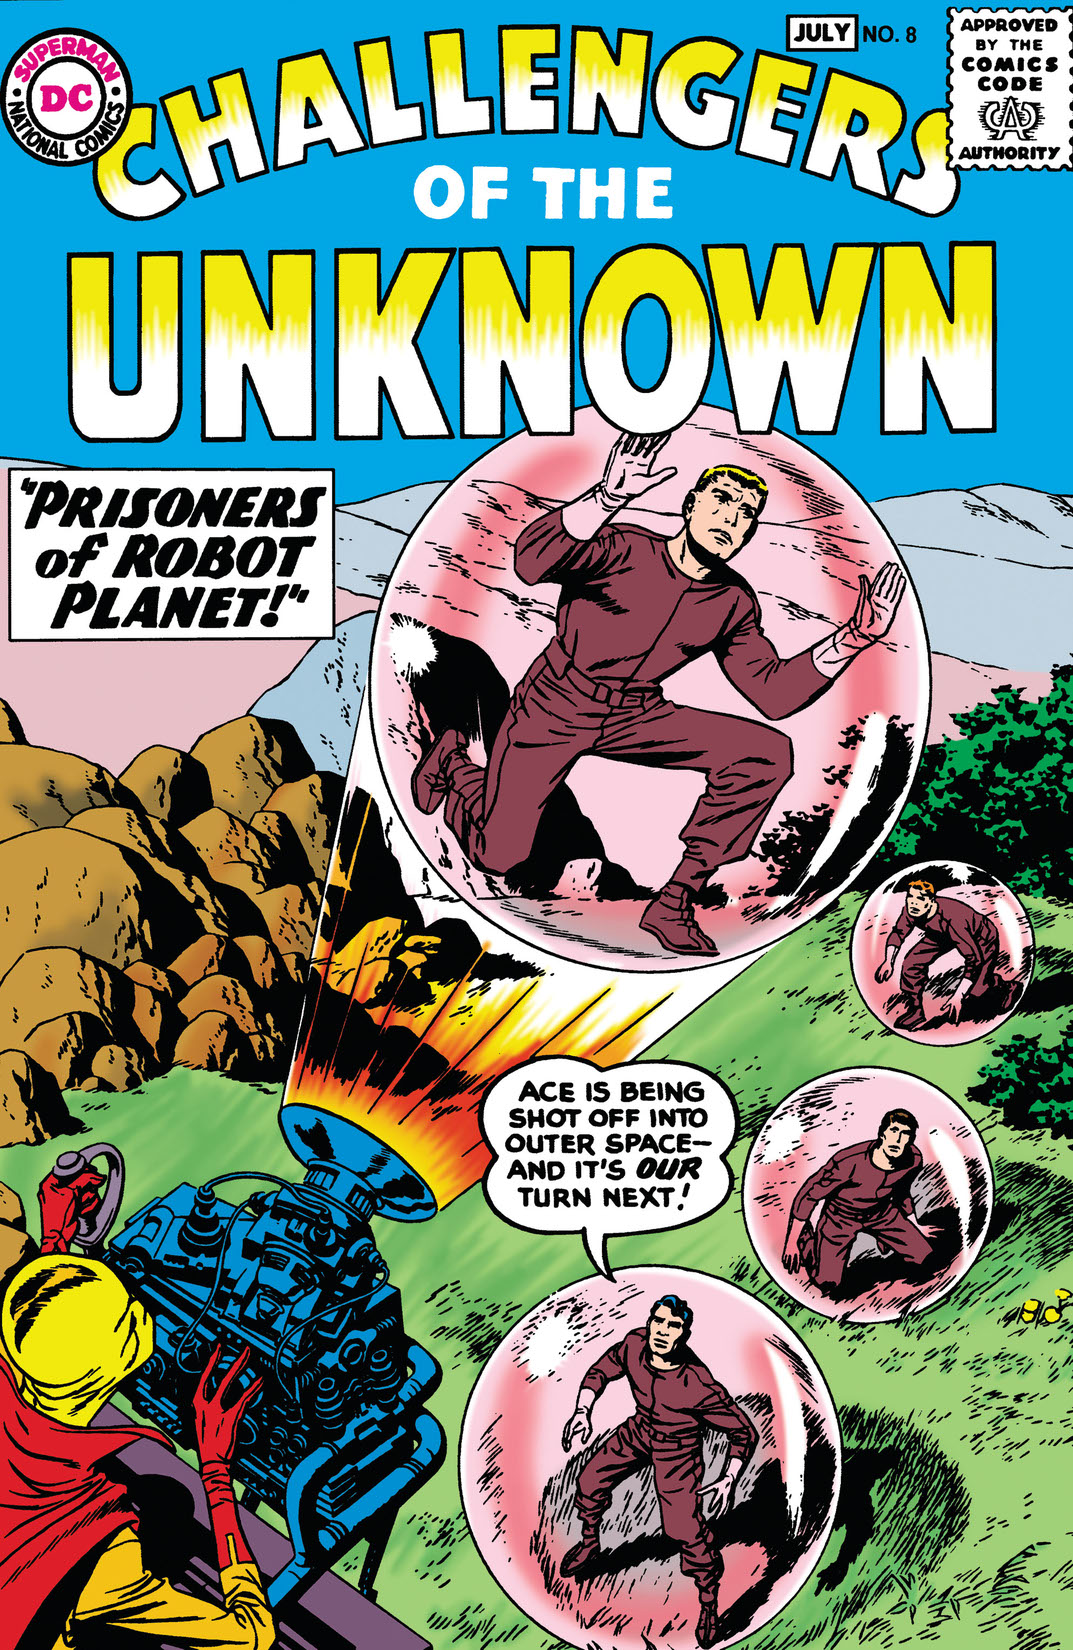 Challengers of the Unknown (1958-) #8 preview images